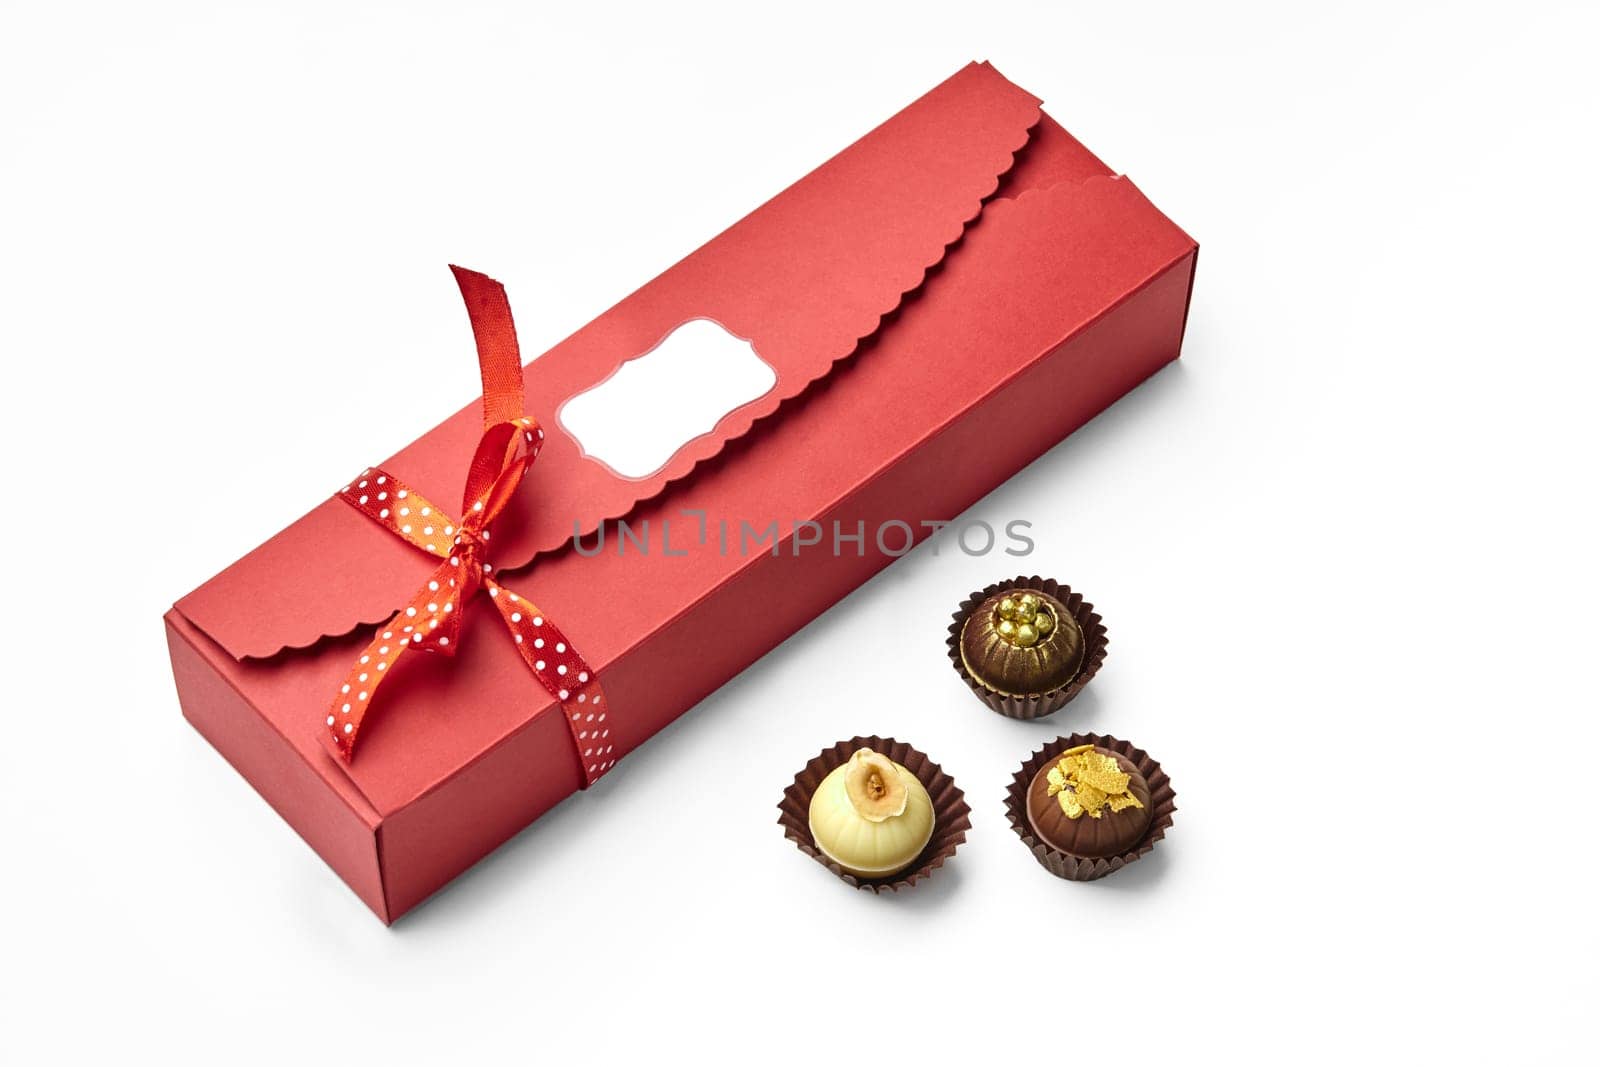 Artisan chocolate candies decorated with nuts, caramel shavings and golden sugar pearls encased in elegant red box with signature label tied with dotted ribbon for gifting